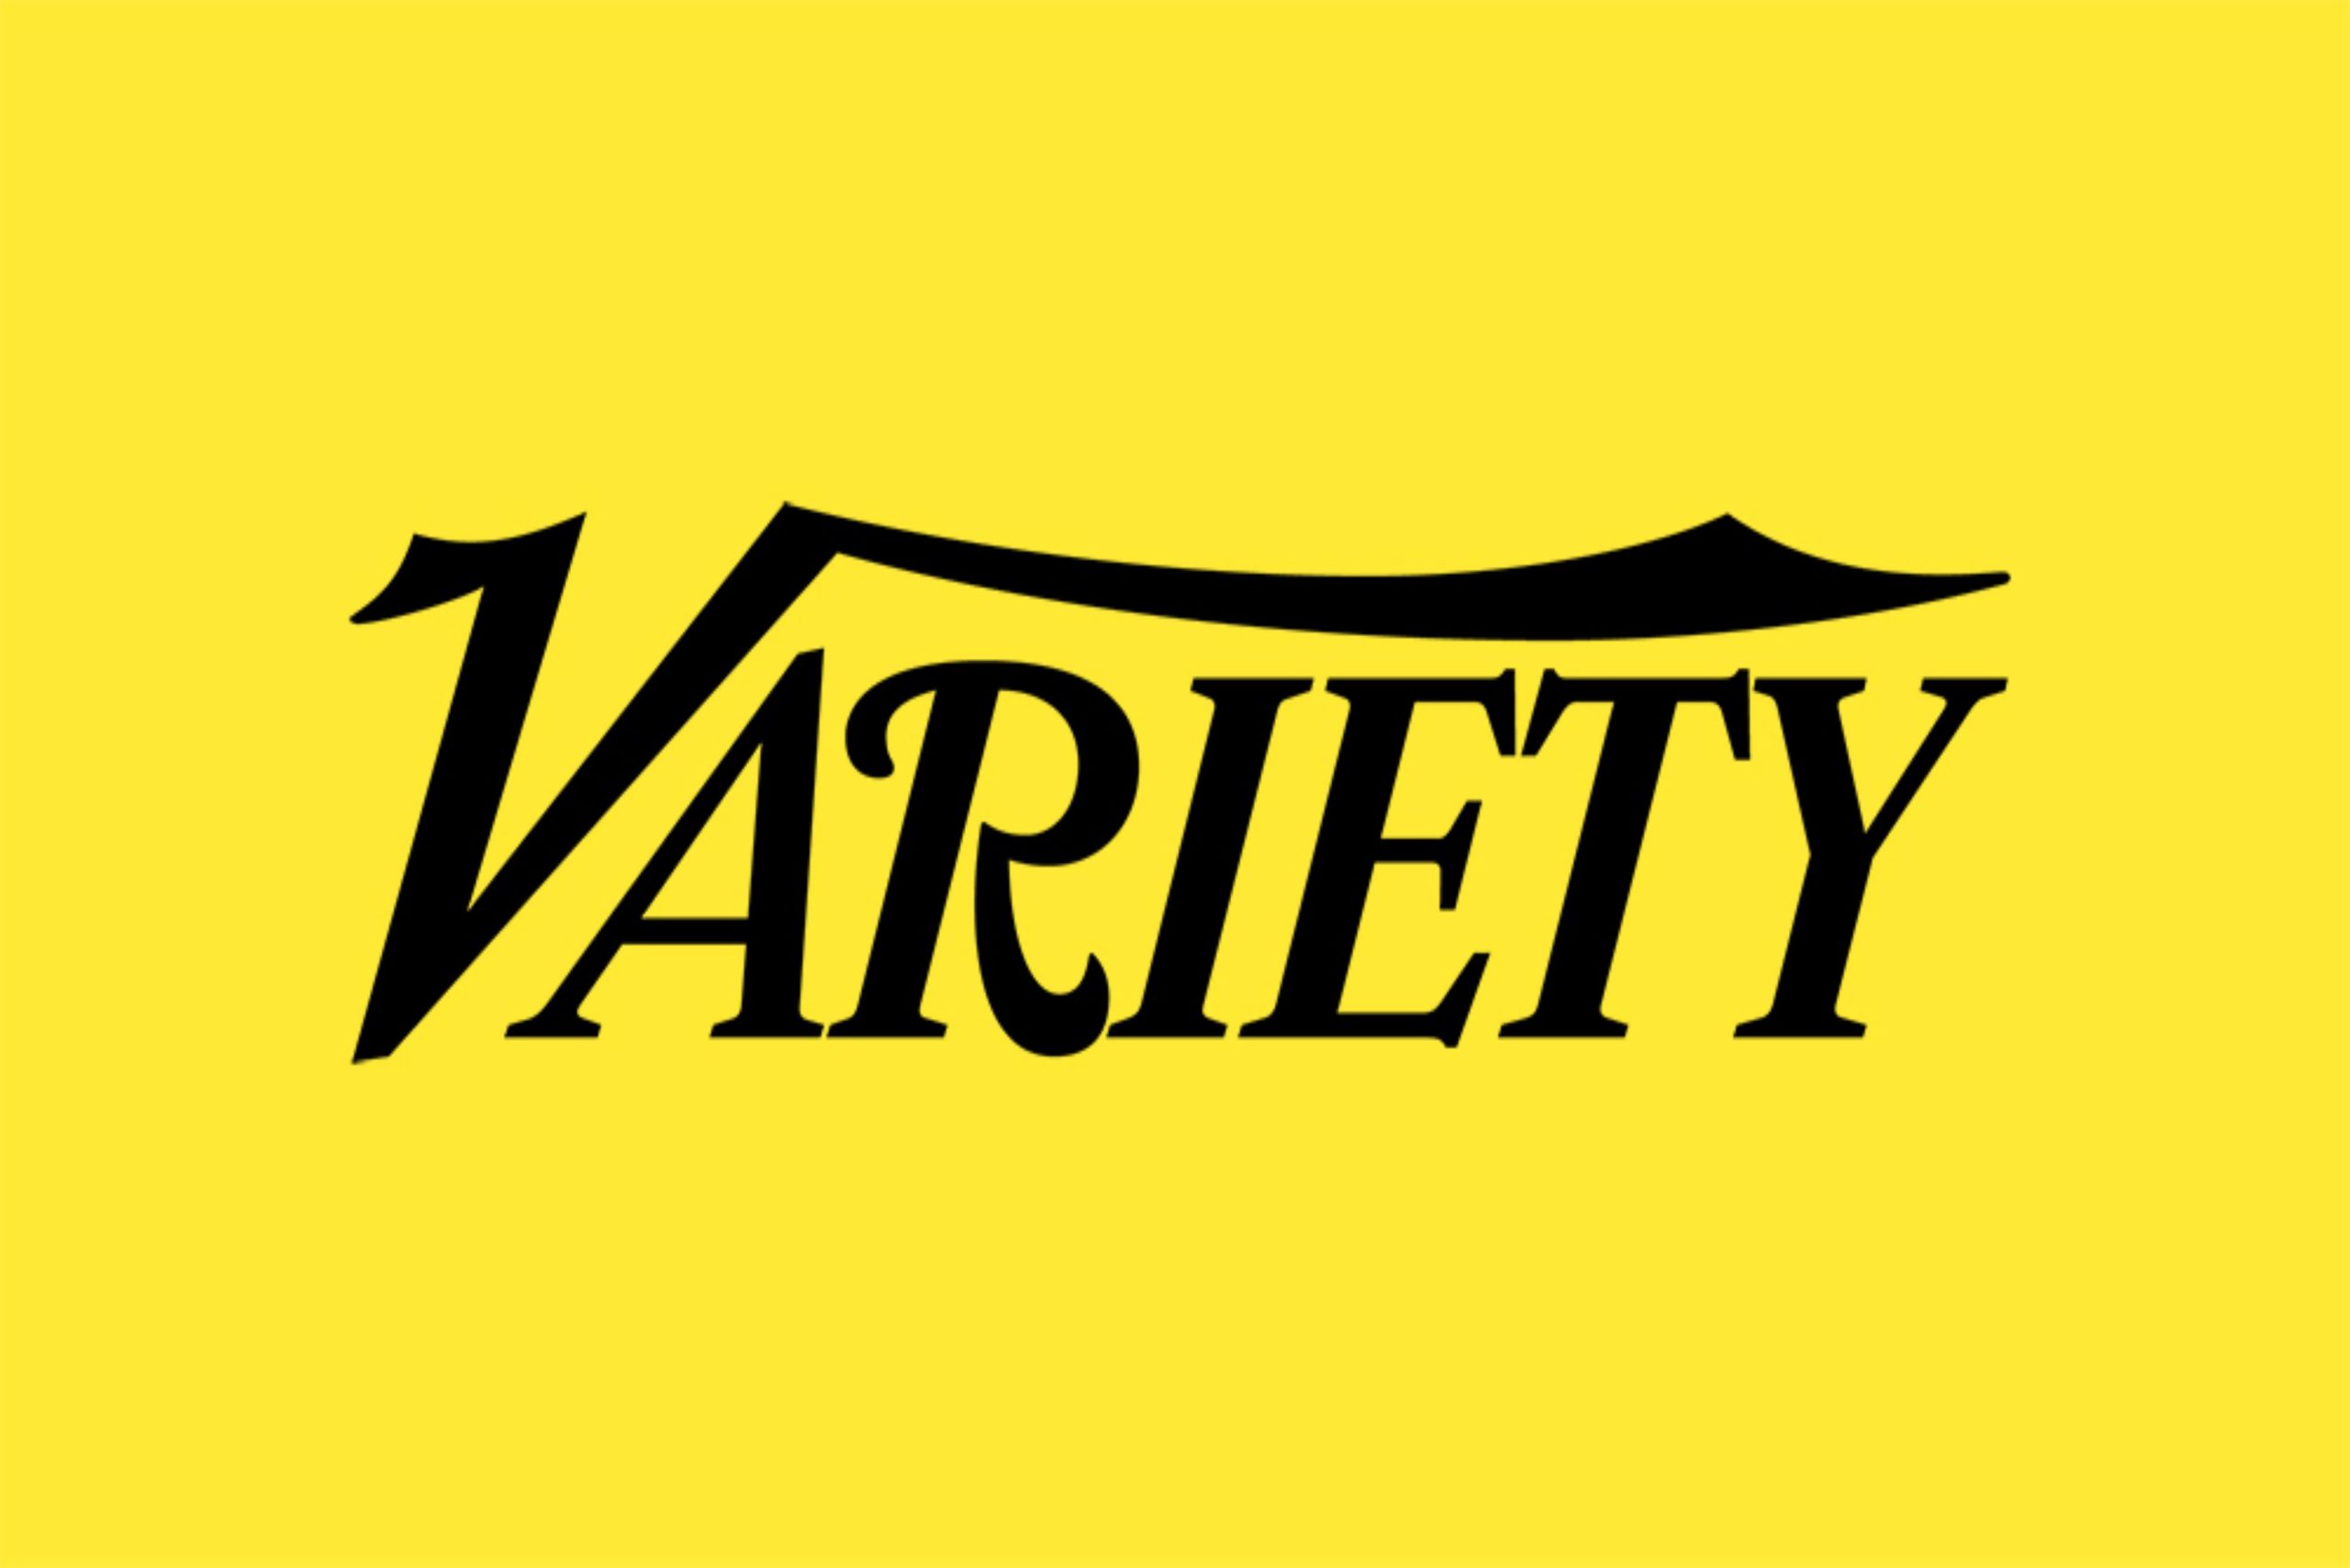 Variety's Business Managers Elite